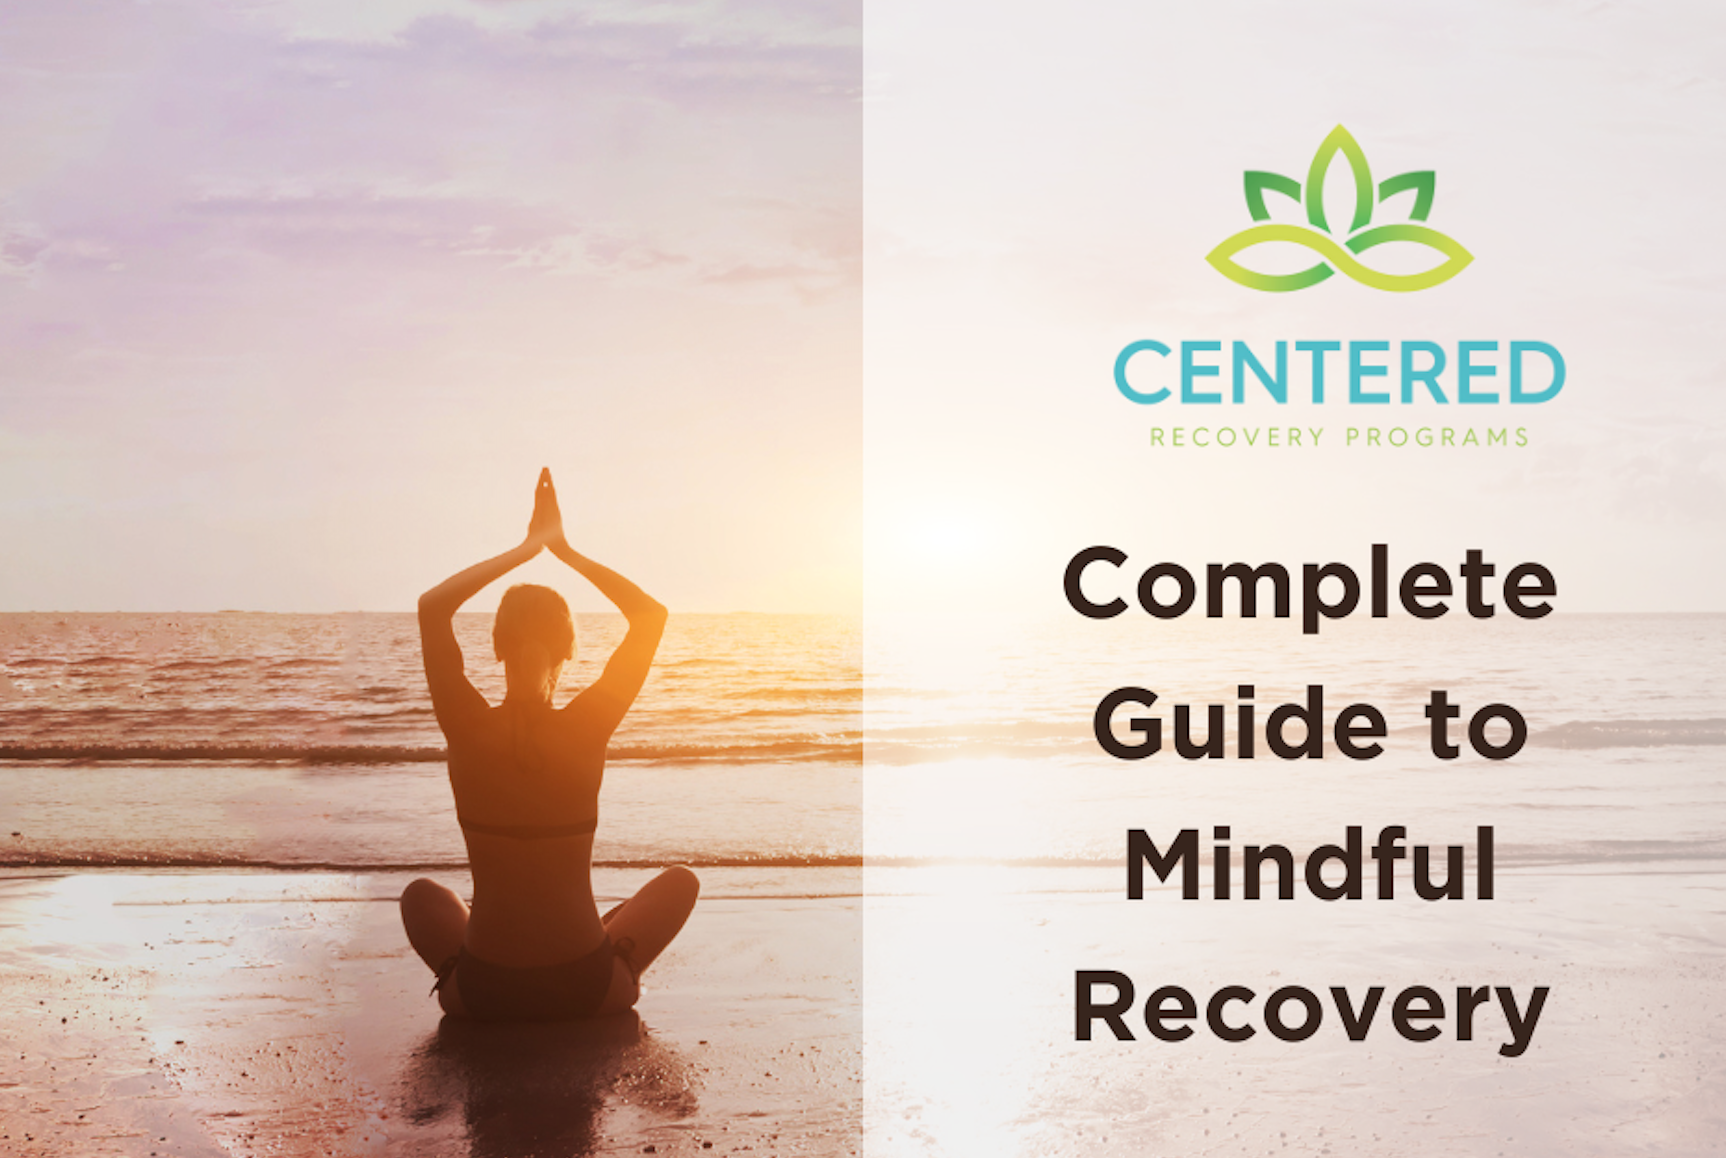 The Complete Guide to Mindful Recovery: A Powerful Tool for Overcoming Addiction